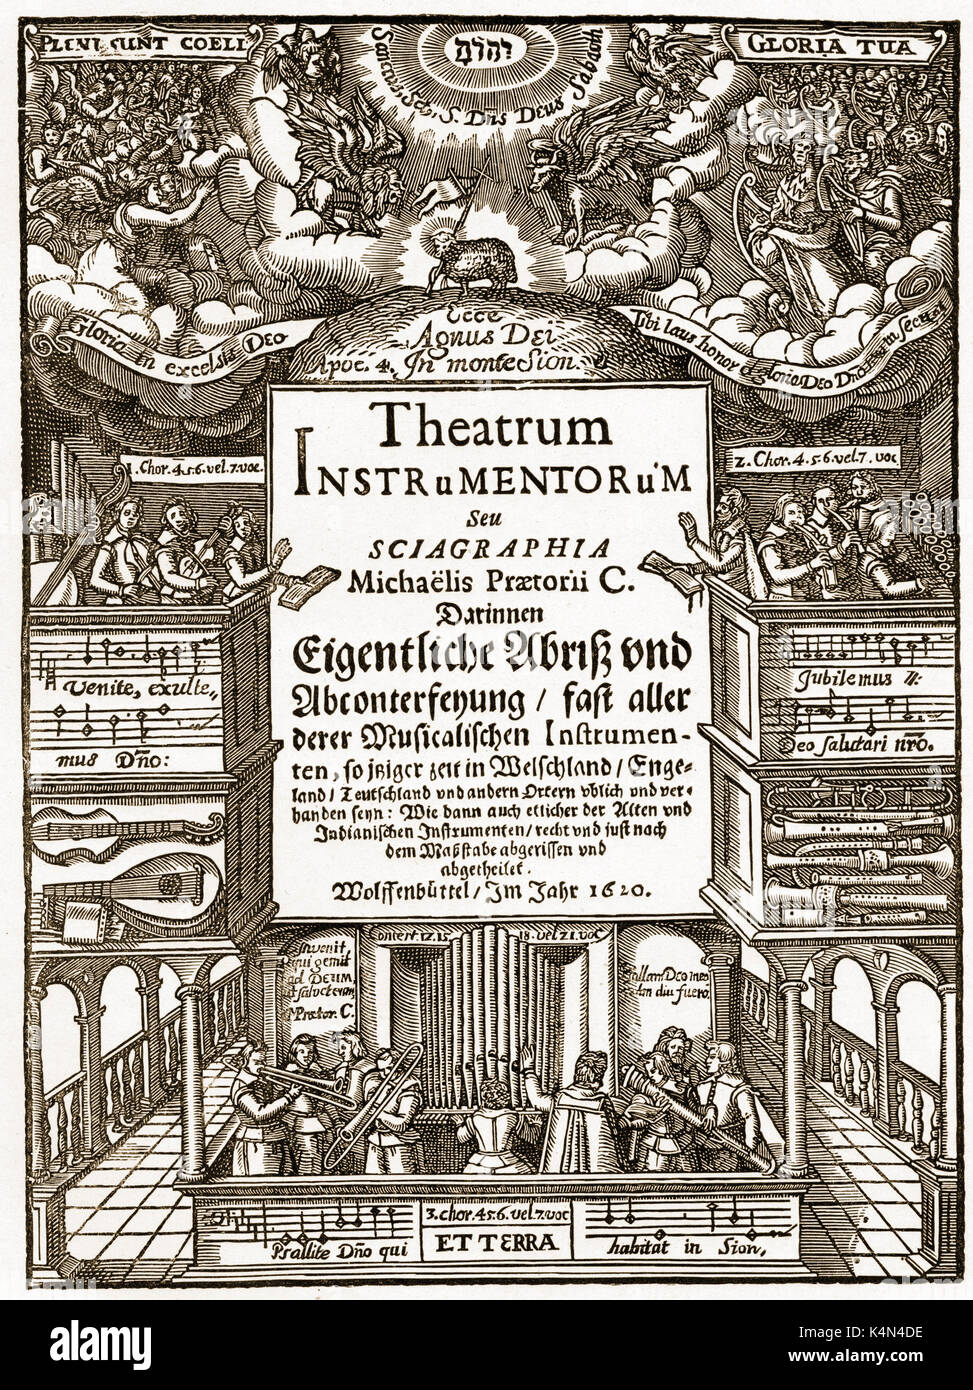 Michael Praetorius - title page of the German musician 's 'Theatrum Instrumentorum' (1620). Index of musical instruments, second part of Syntagma Musicum. MP, German musician, composer and theorist: 15 February 1571 - 15 February 1621. Stock Photo